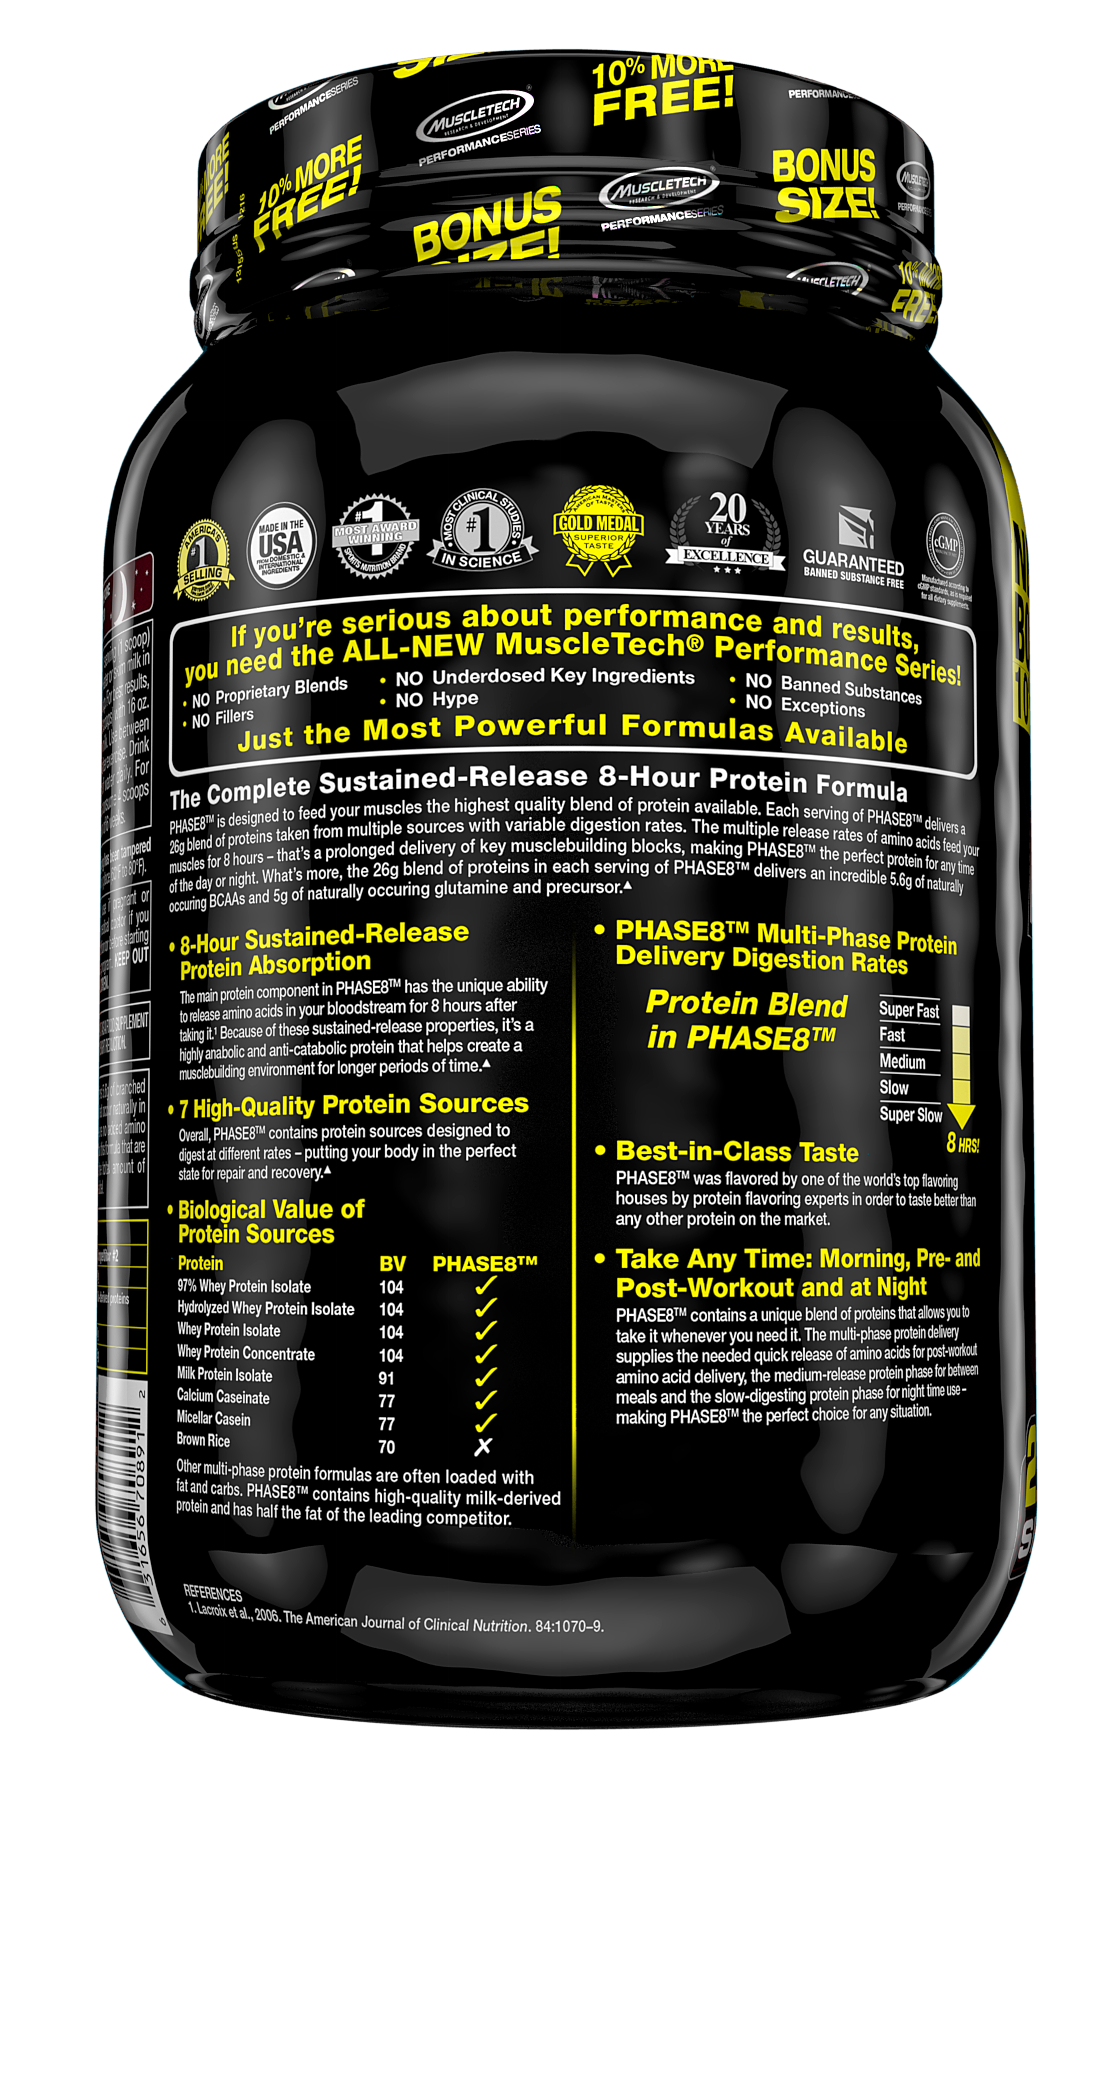 Phase8 Whey Protein Powder, Sustained Release 8-Hour Protein Shake, Milk Chocolate, 22 Servings (2.0lbs) - image 3 of 4